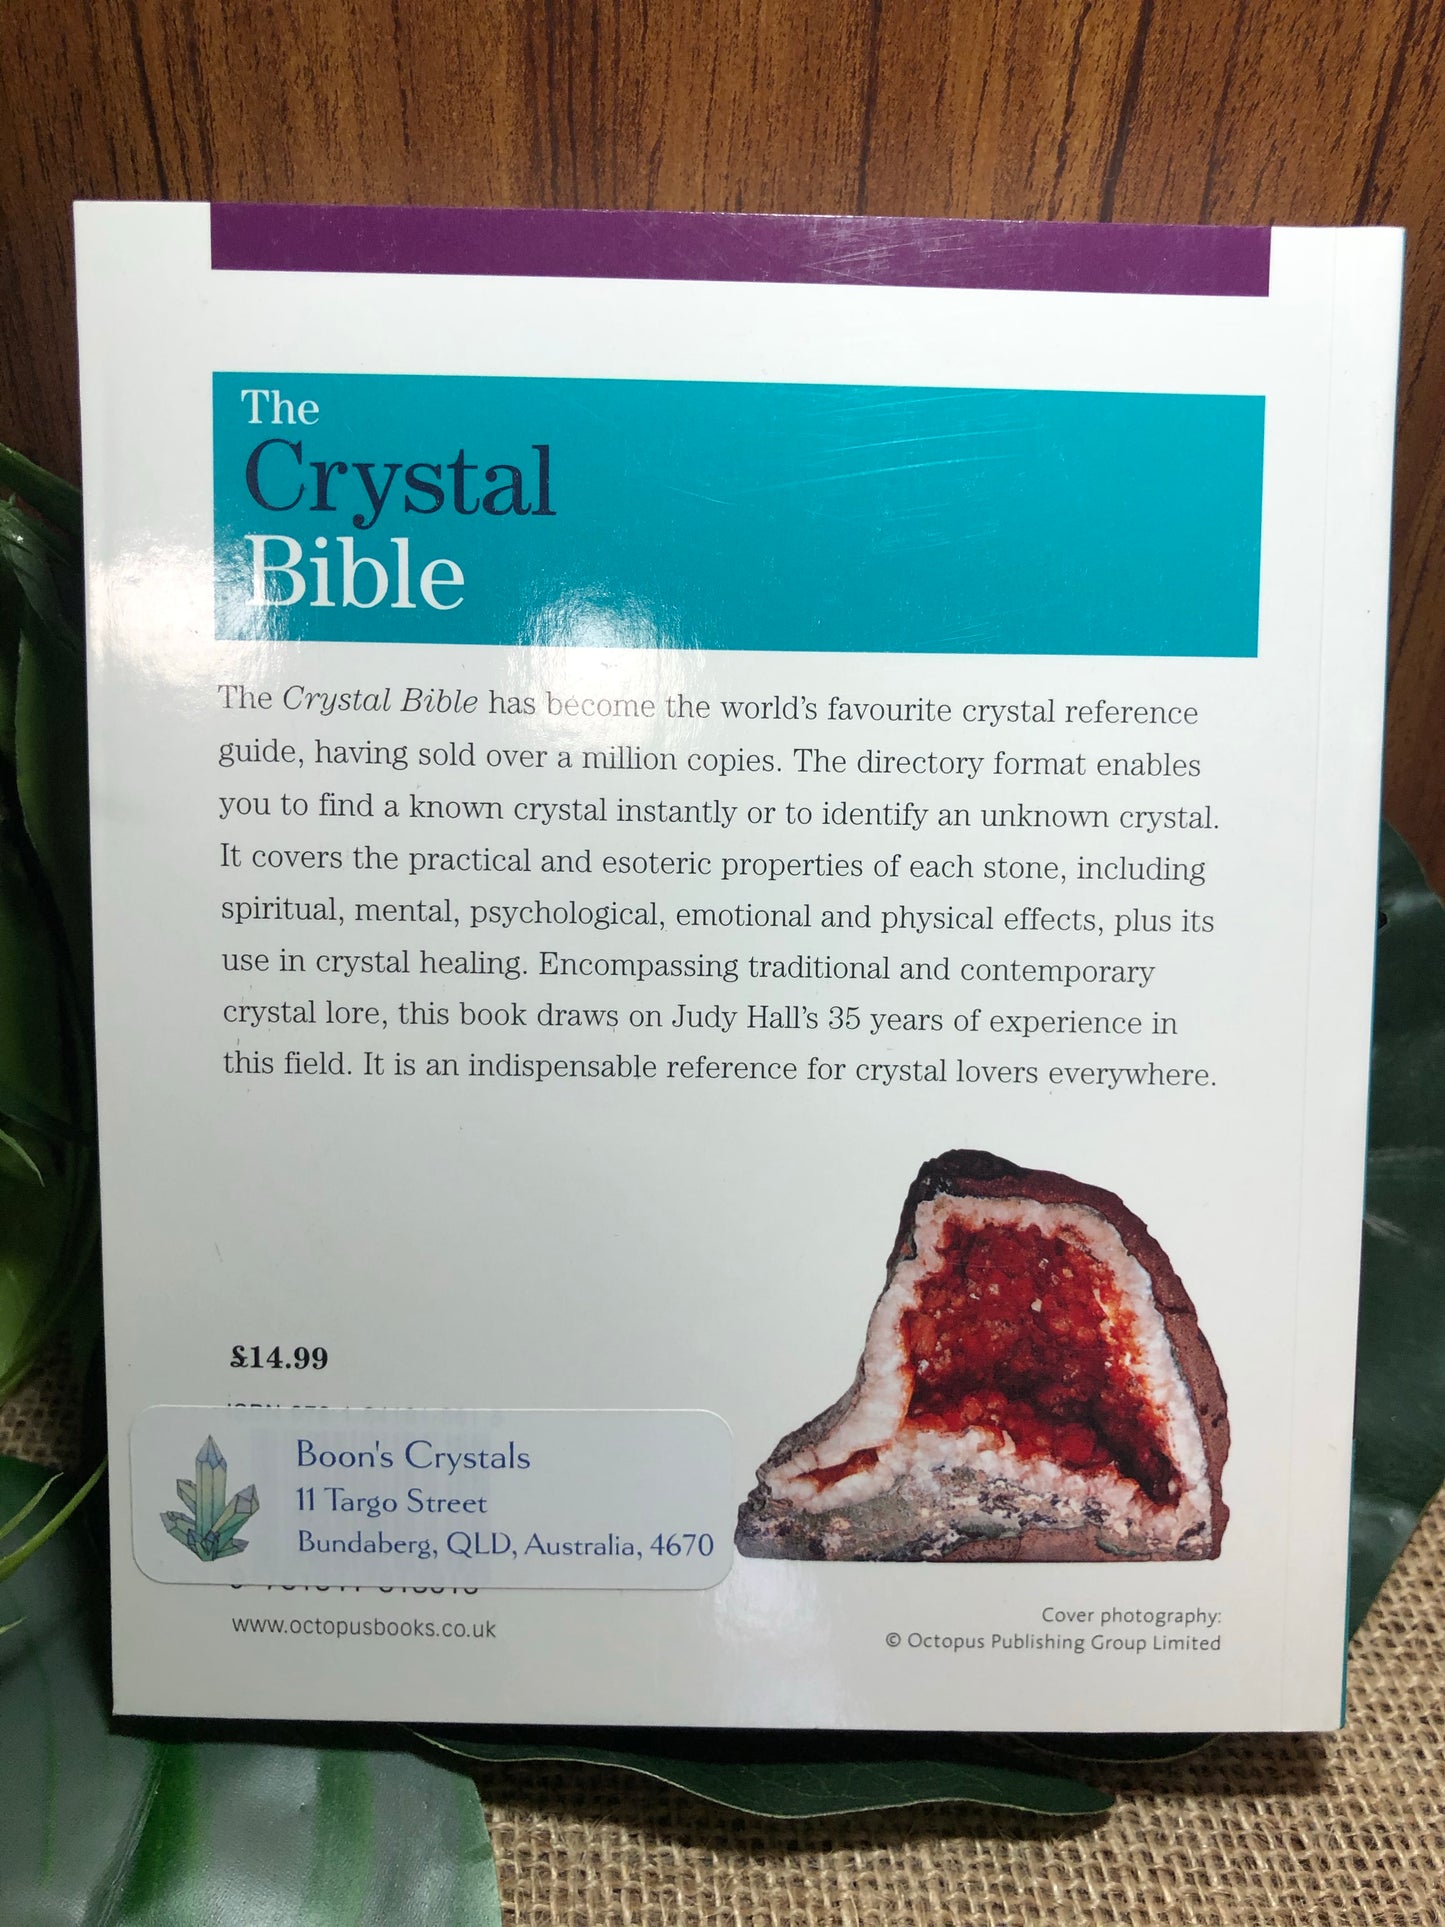 The Crystal Bible Vol. 1